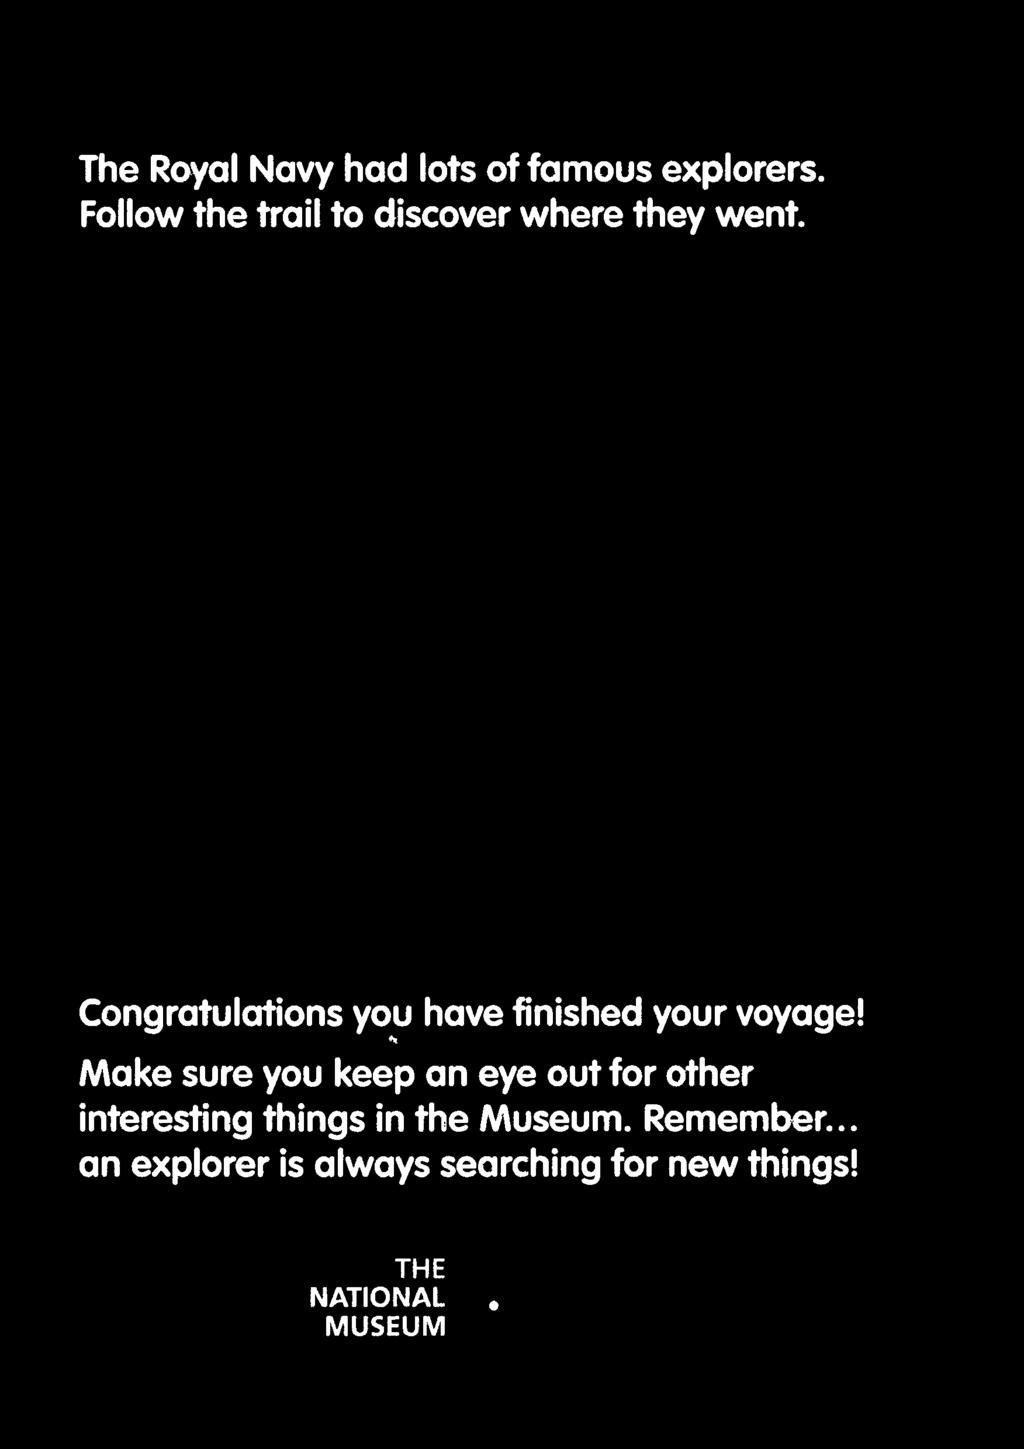 I have discovered that Congratulations you have finished your voyage!